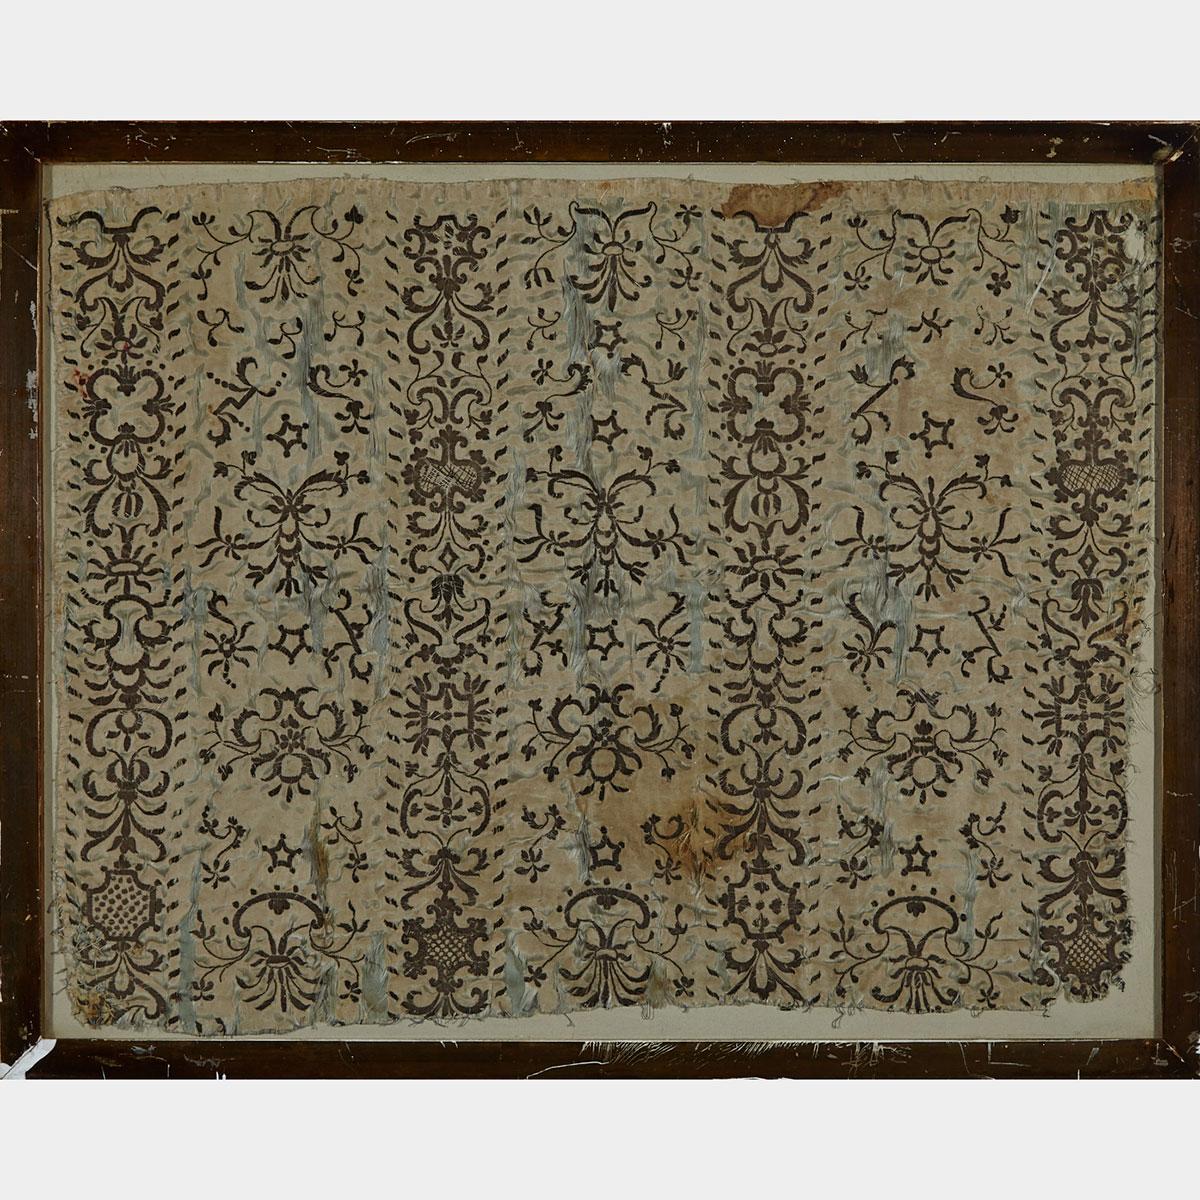 Silver Thread Needlework Panel, late 17th/early 18th century